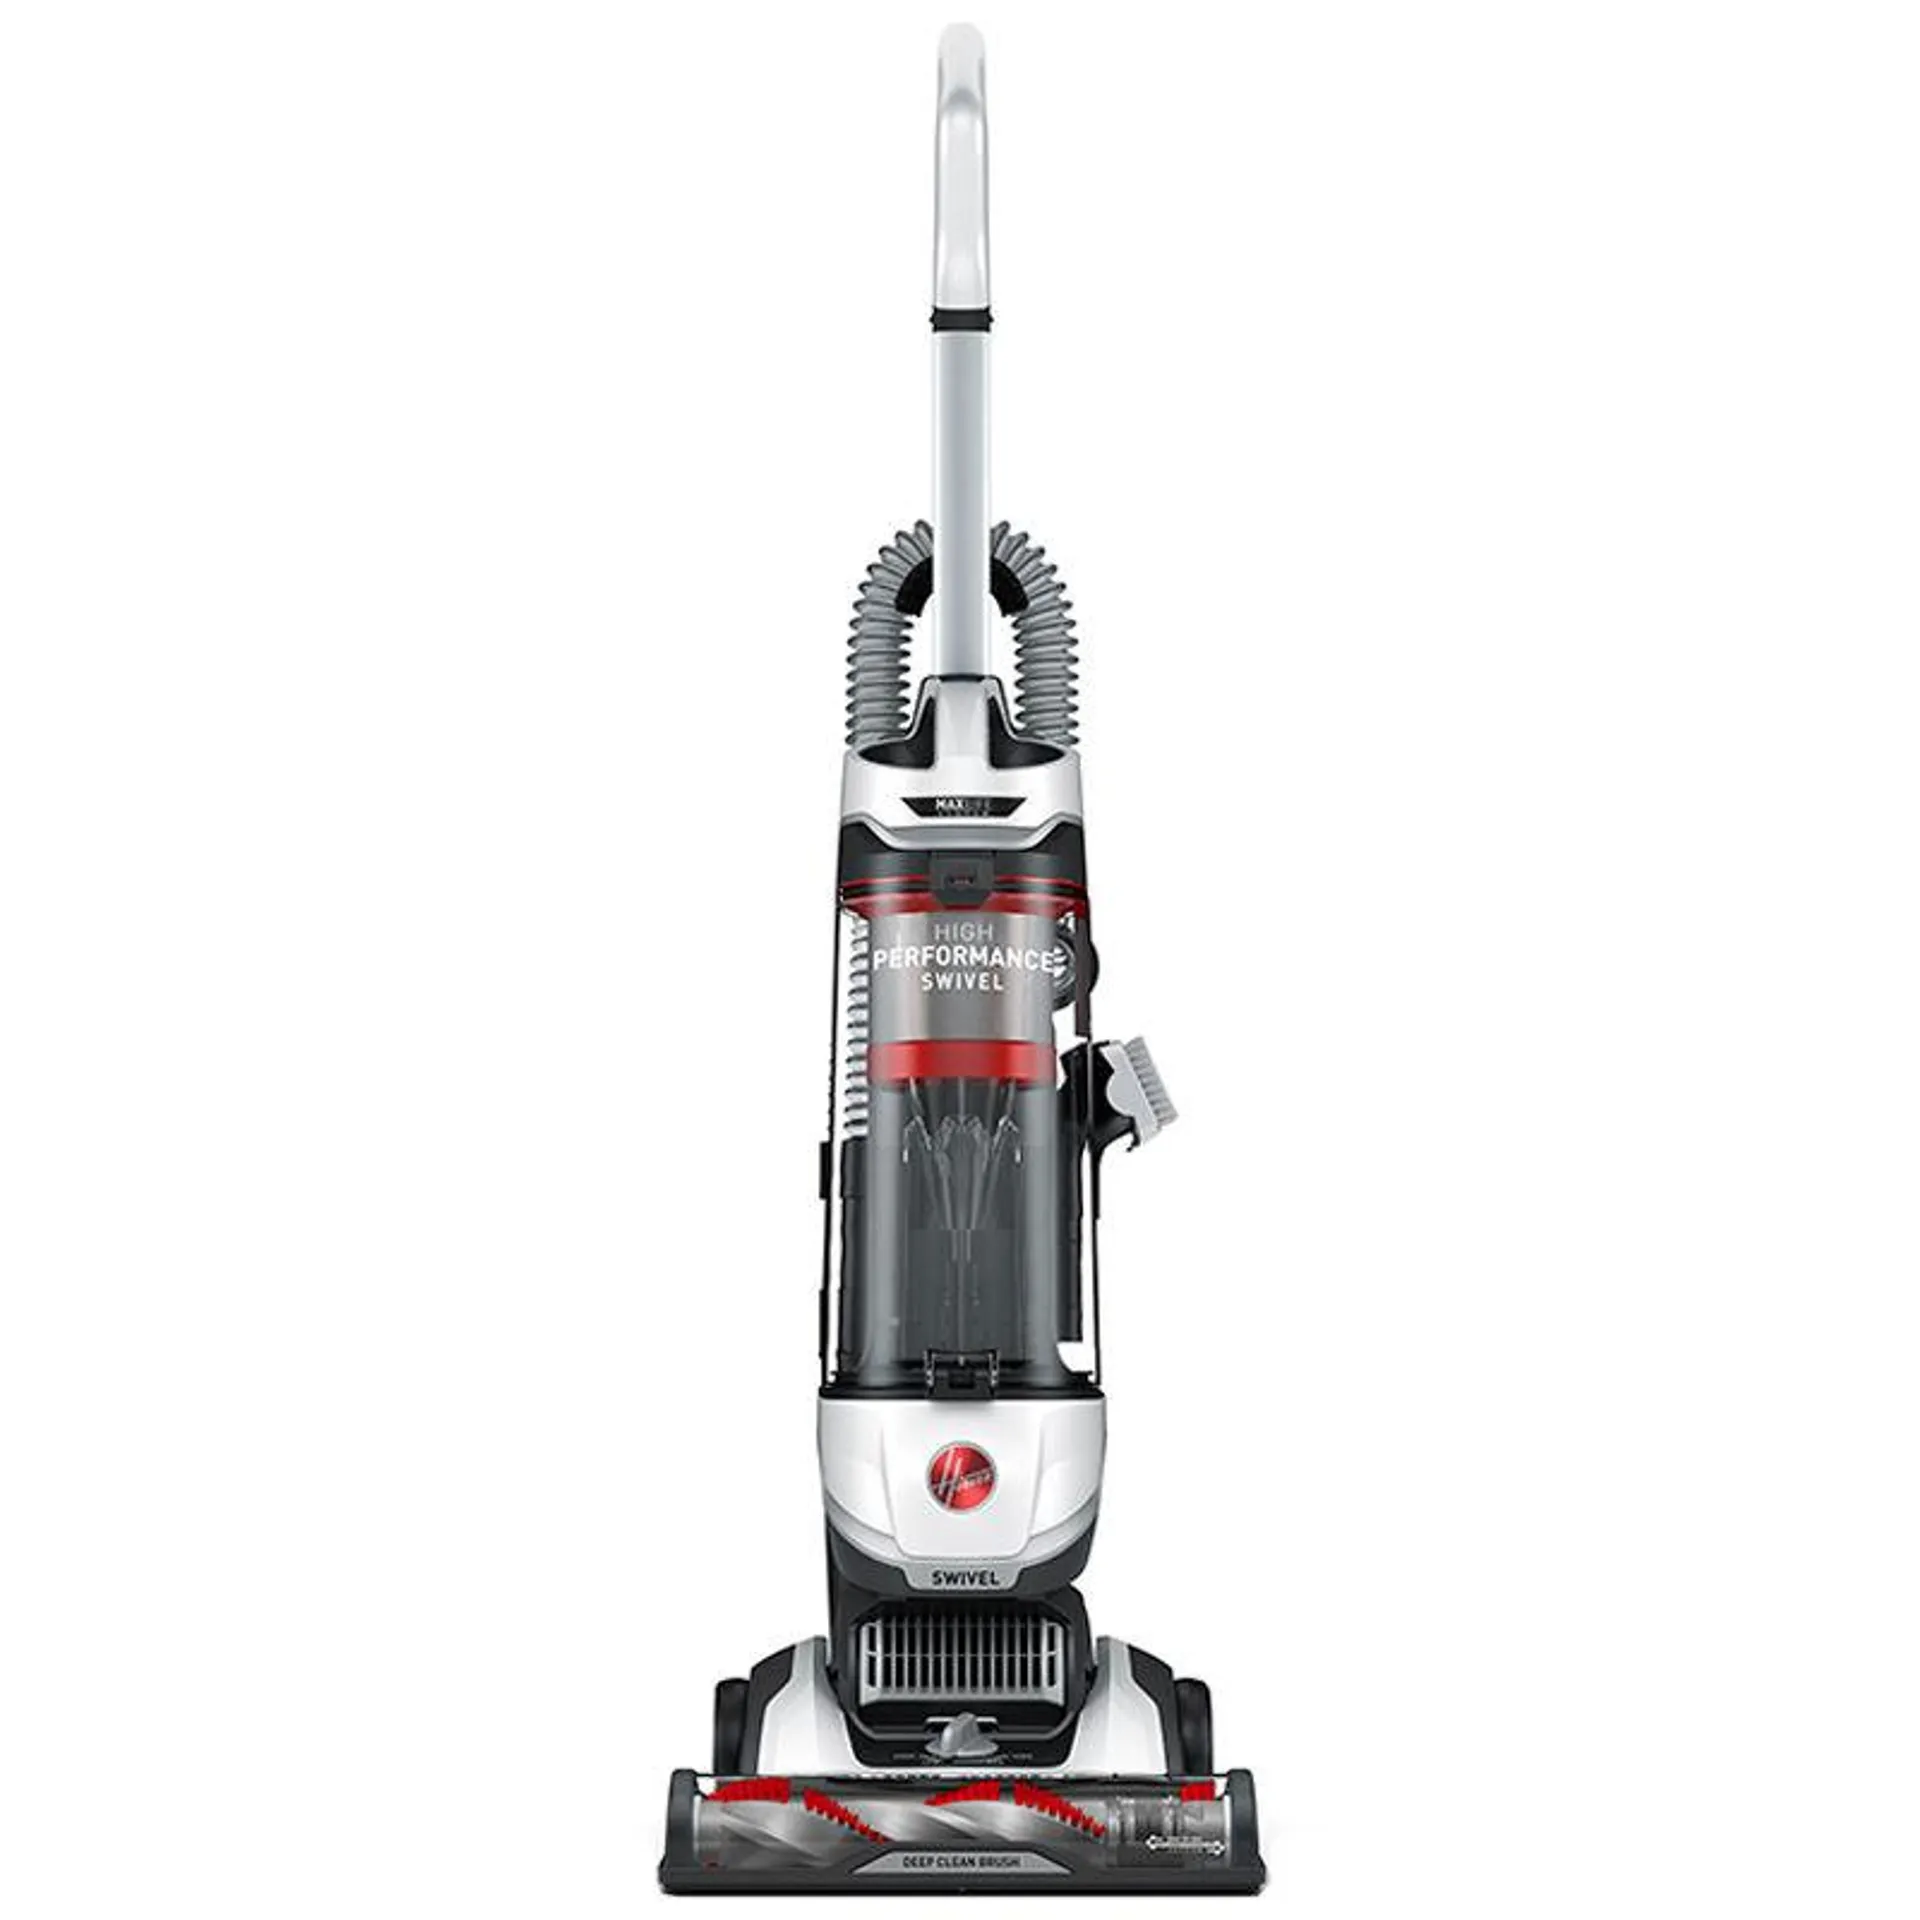 Hoover High Performance Swivel Bagless Pet Upright Vacuum with HEPA Filter and 2 Multi-Use Tools